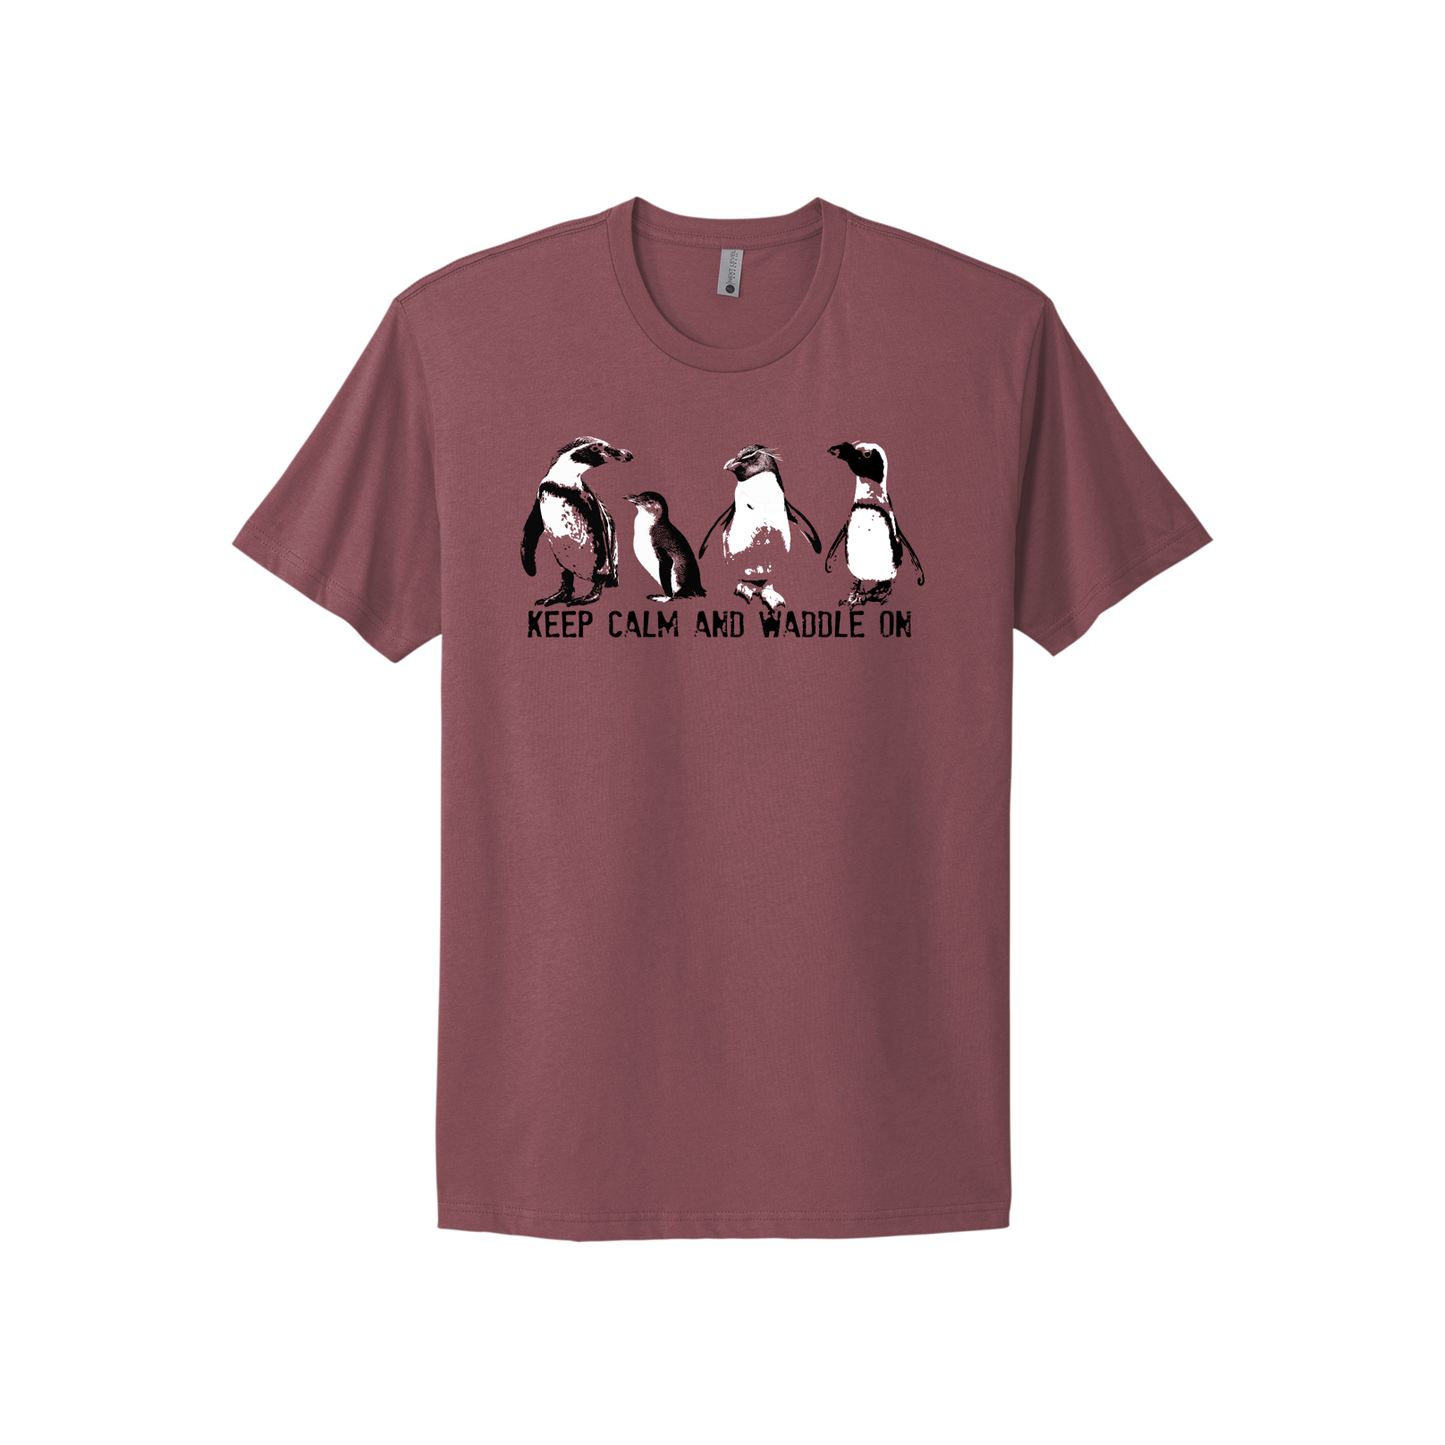 Penguins - Keep Calm and Waddle on - Unisex Cotton Tee (Pre order)